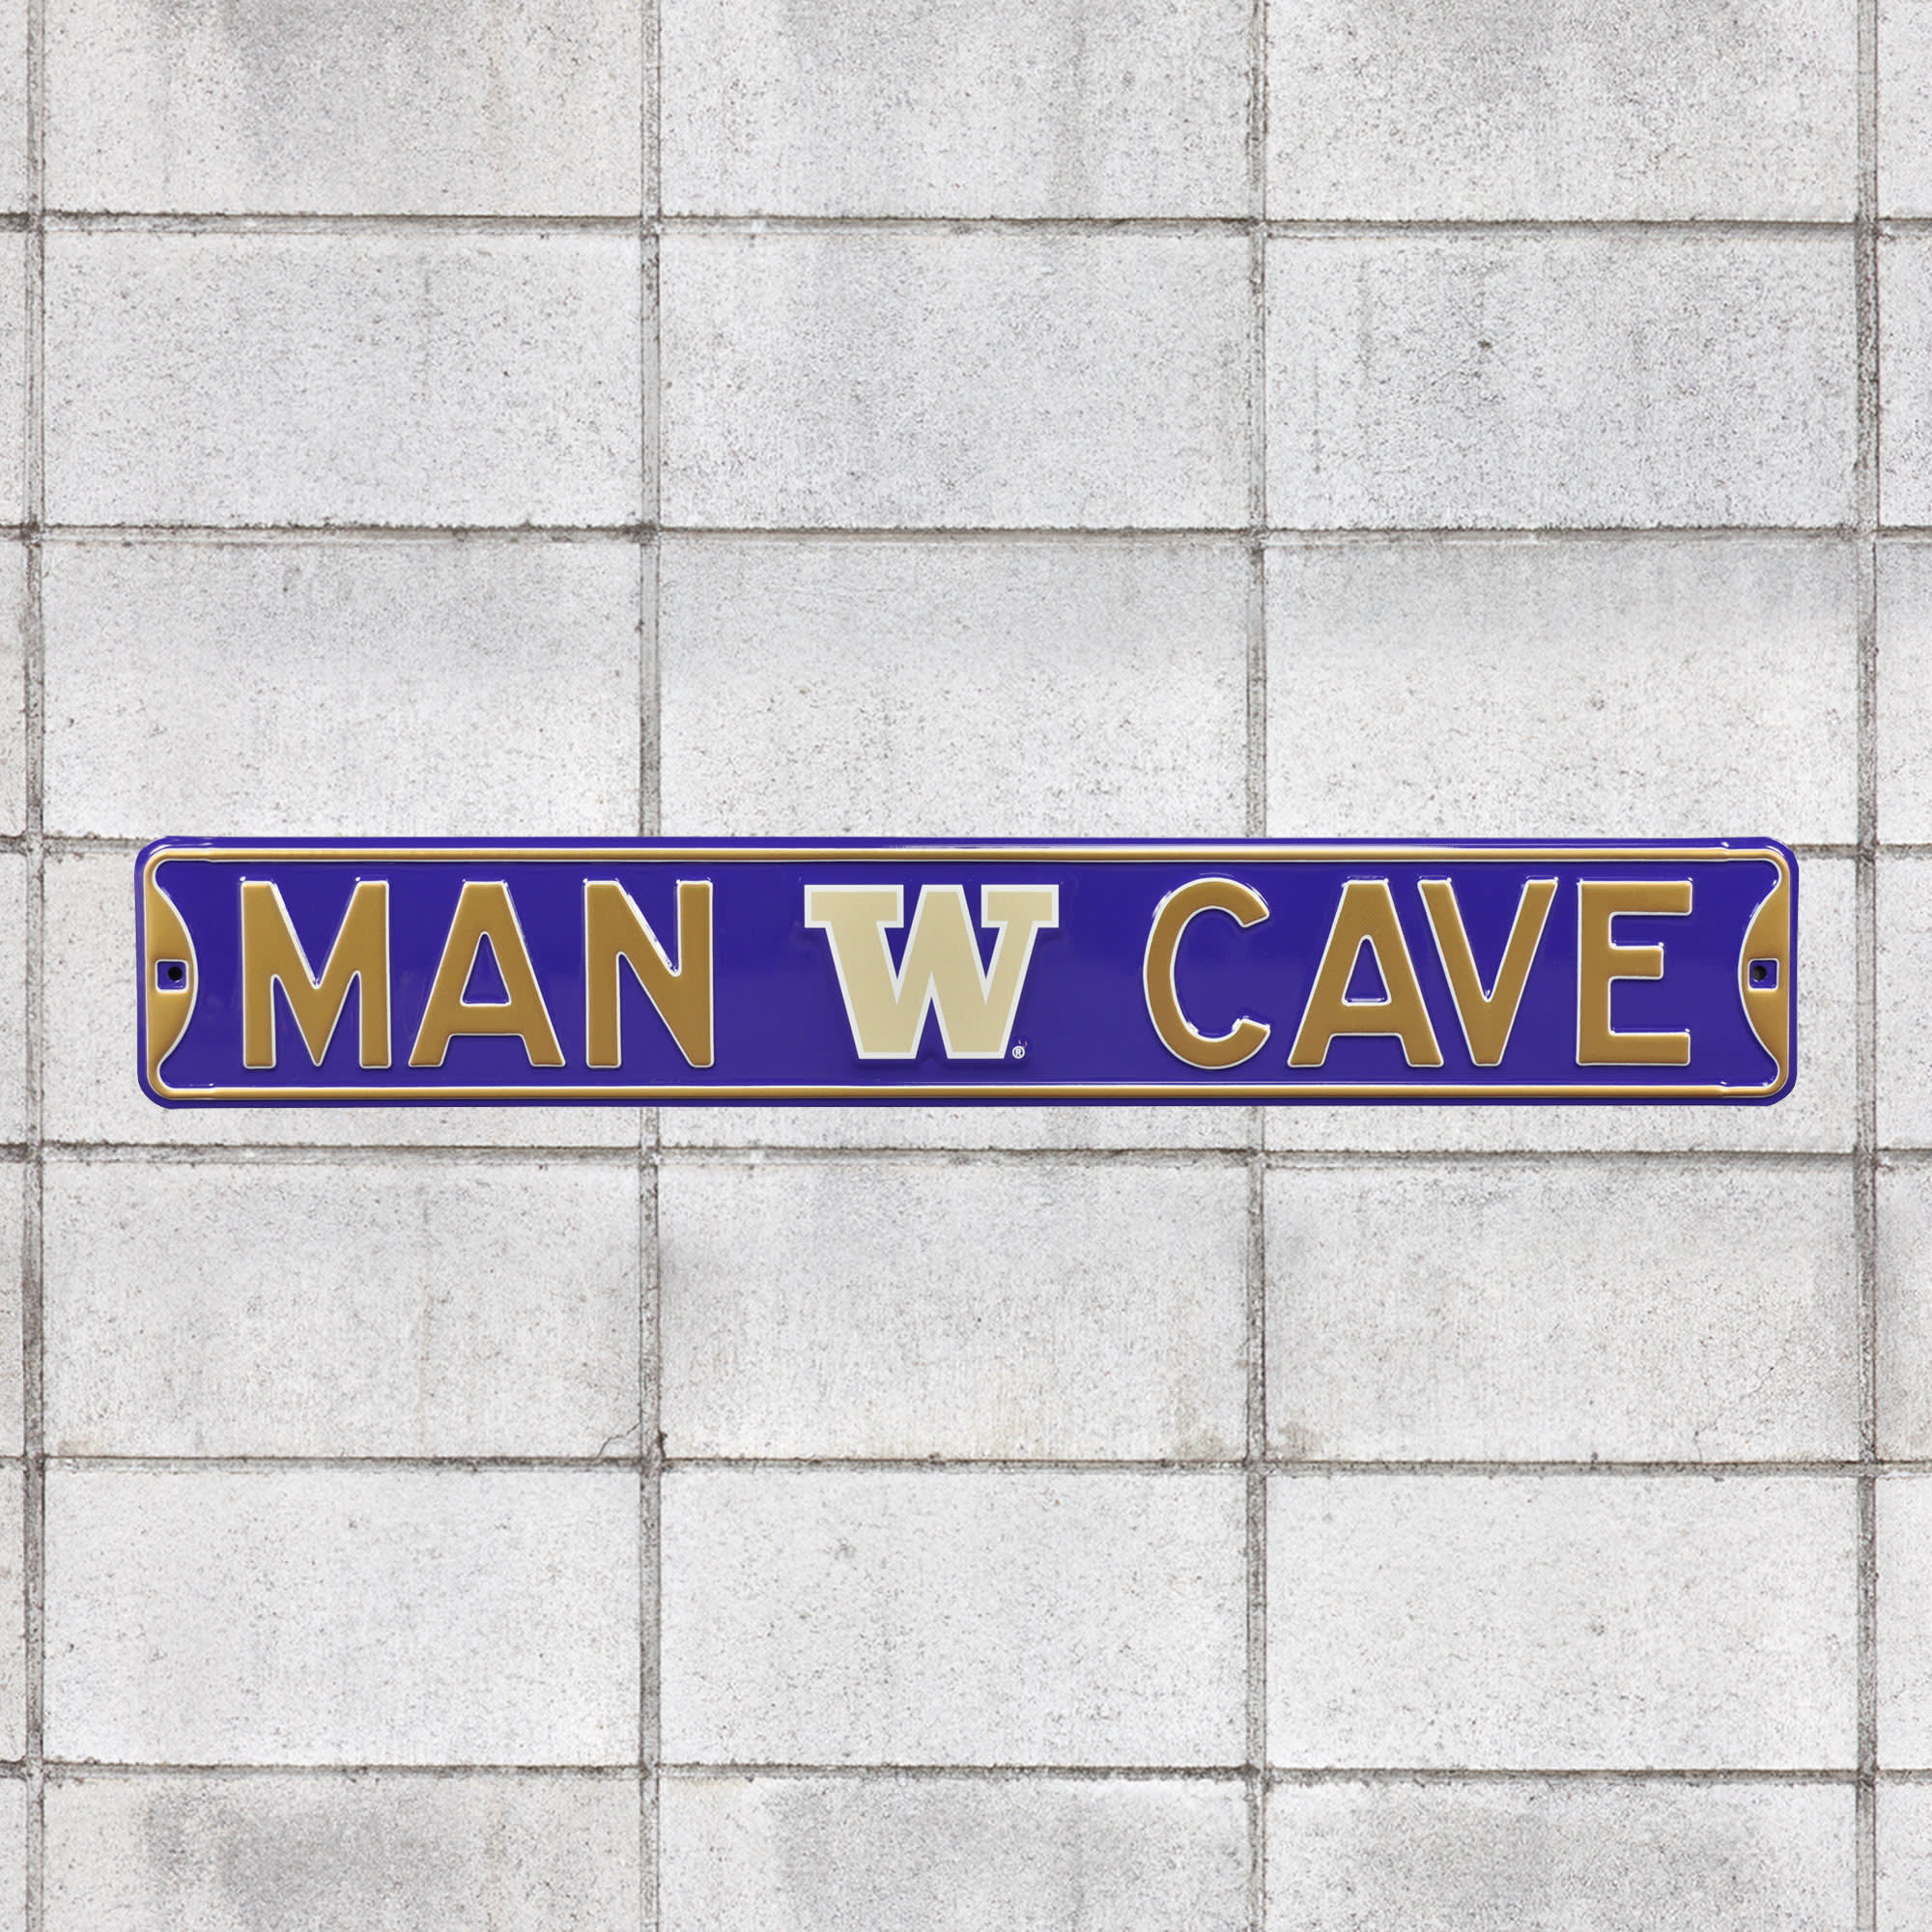 Washington Huskies: Man Cave - Officially Licensed Metal Street Sign 36.0"W x 6.0"H by Fathead | 100% Steel